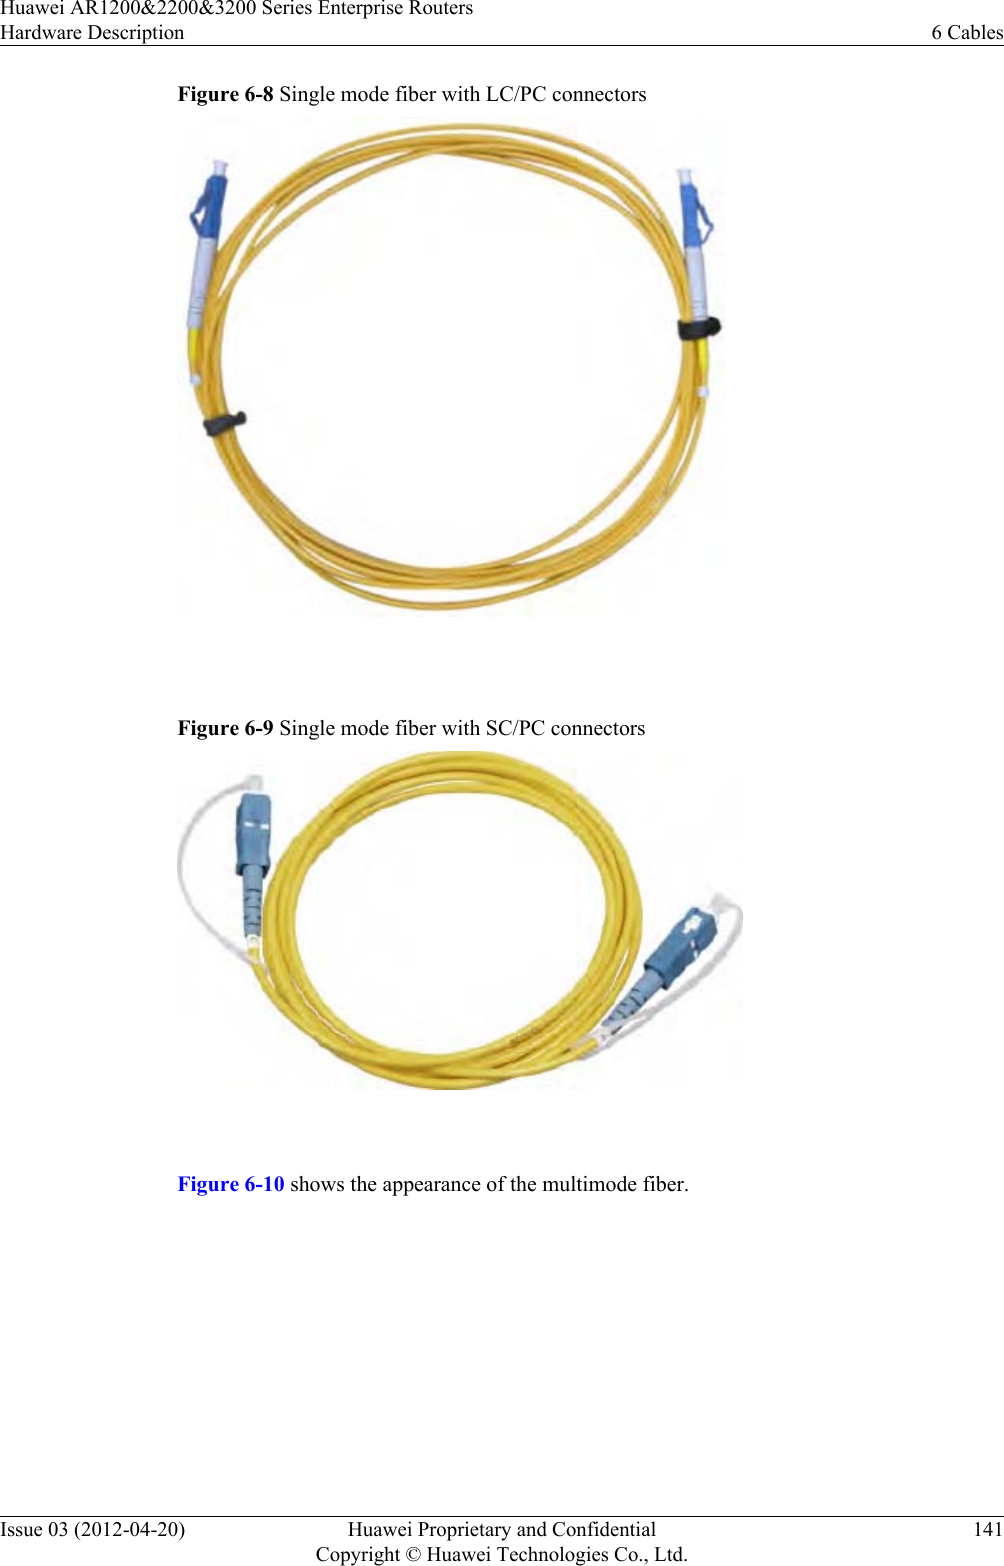 Figure 6-8 Single mode fiber with LC/PC connectors Figure 6-9 Single mode fiber with SC/PC connectors Figure 6-10 shows the appearance of the multimode fiber.Huawei AR1200&amp;2200&amp;3200 Series Enterprise RoutersHardware Description 6 CablesIssue 03 (2012-04-20) Huawei Proprietary and ConfidentialCopyright © Huawei Technologies Co., Ltd.141